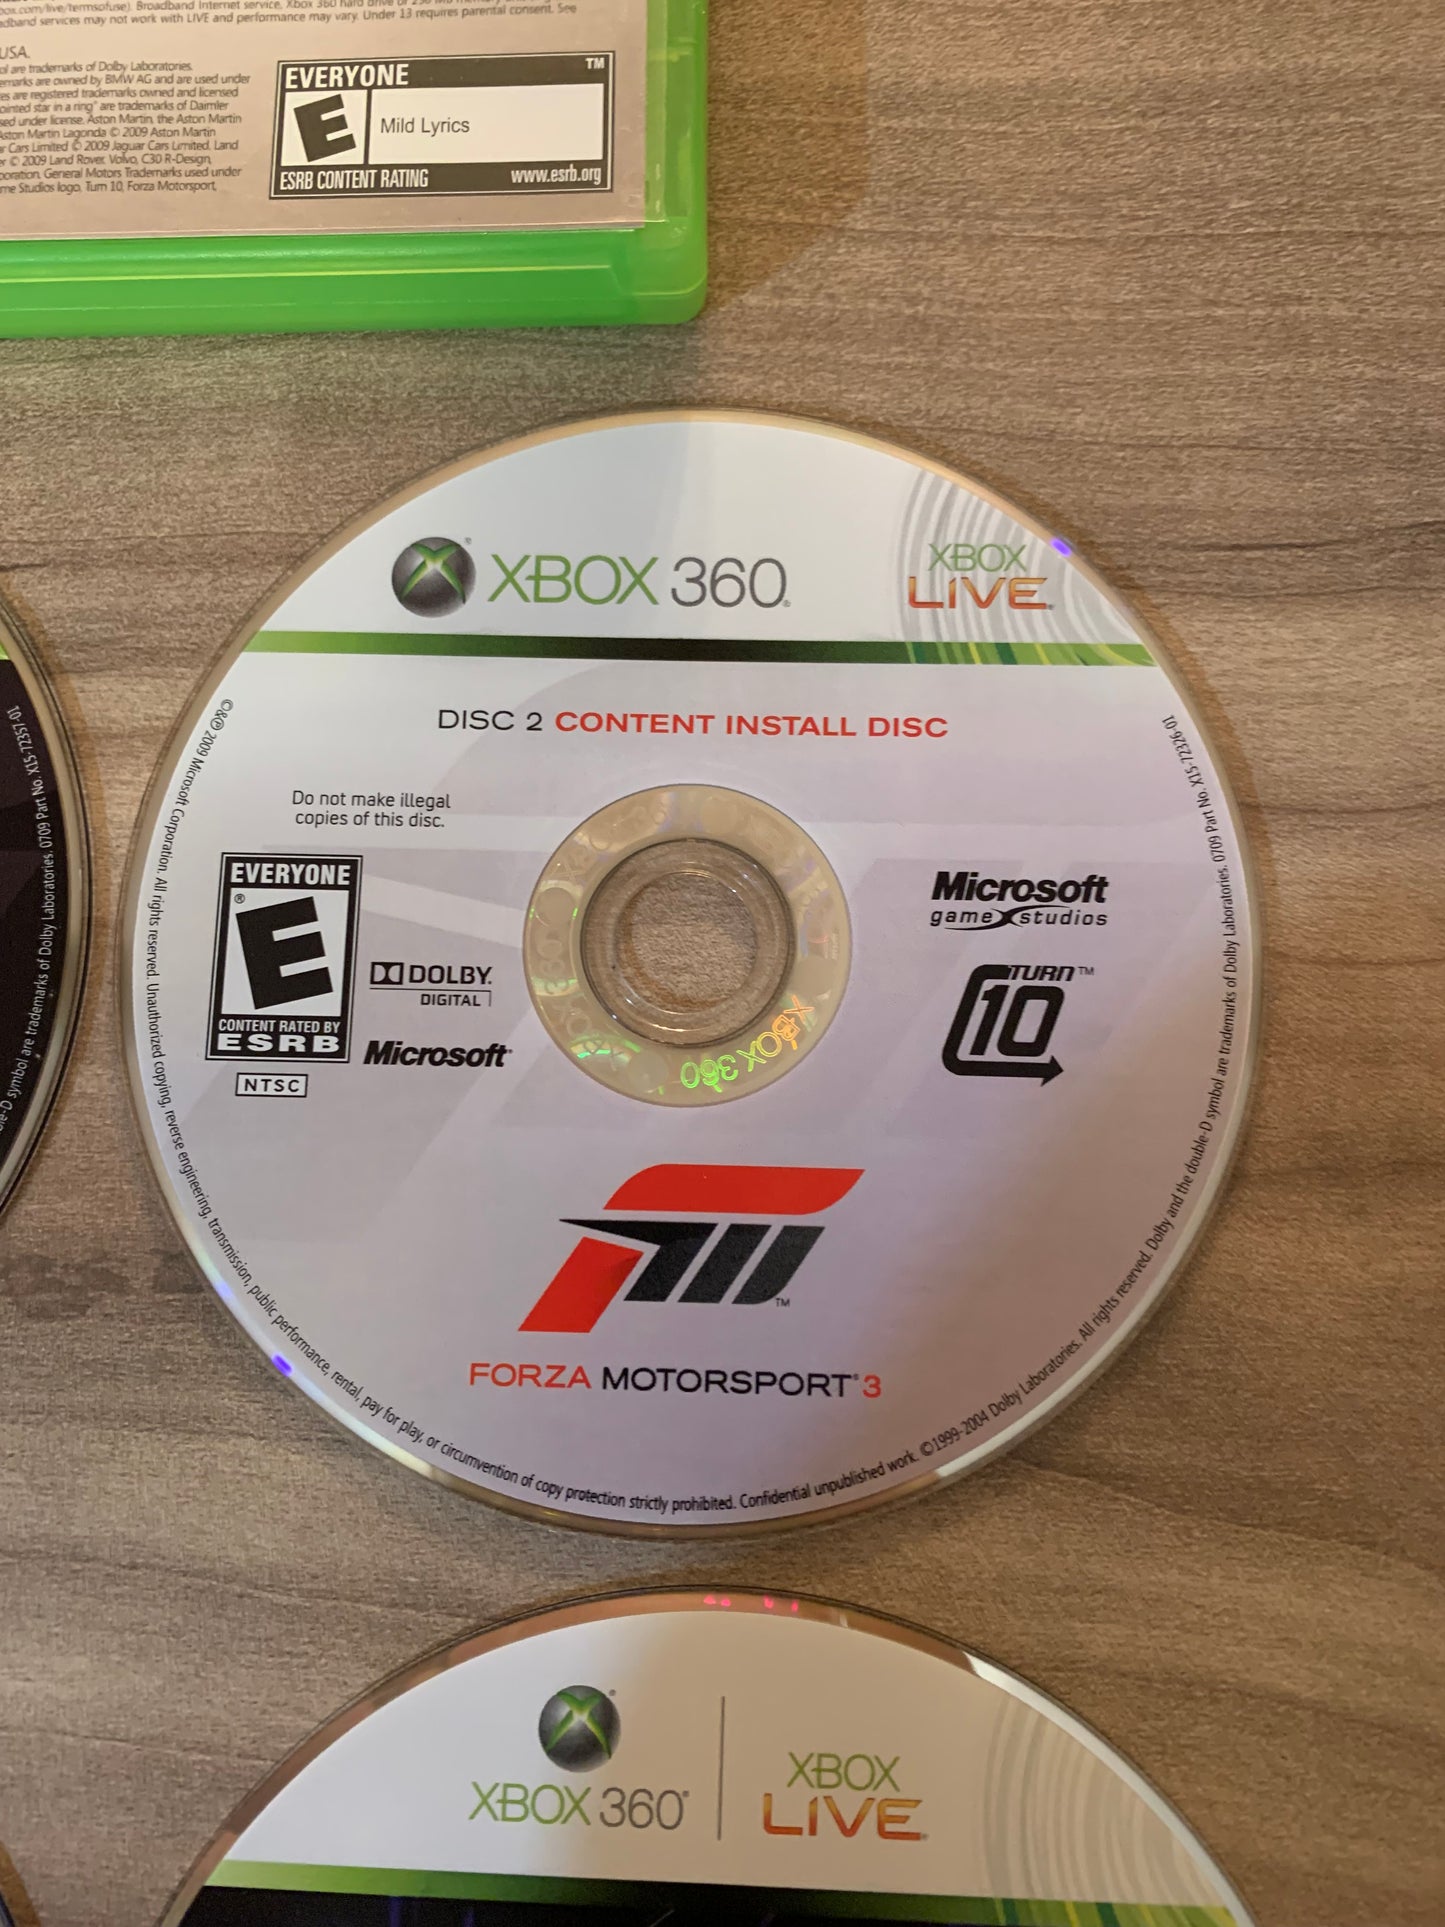 Microsoft XBOX 360 | FORZA MOTORSPORT 3 &amp; HALO 3 ODST | NOT FOR RESALE